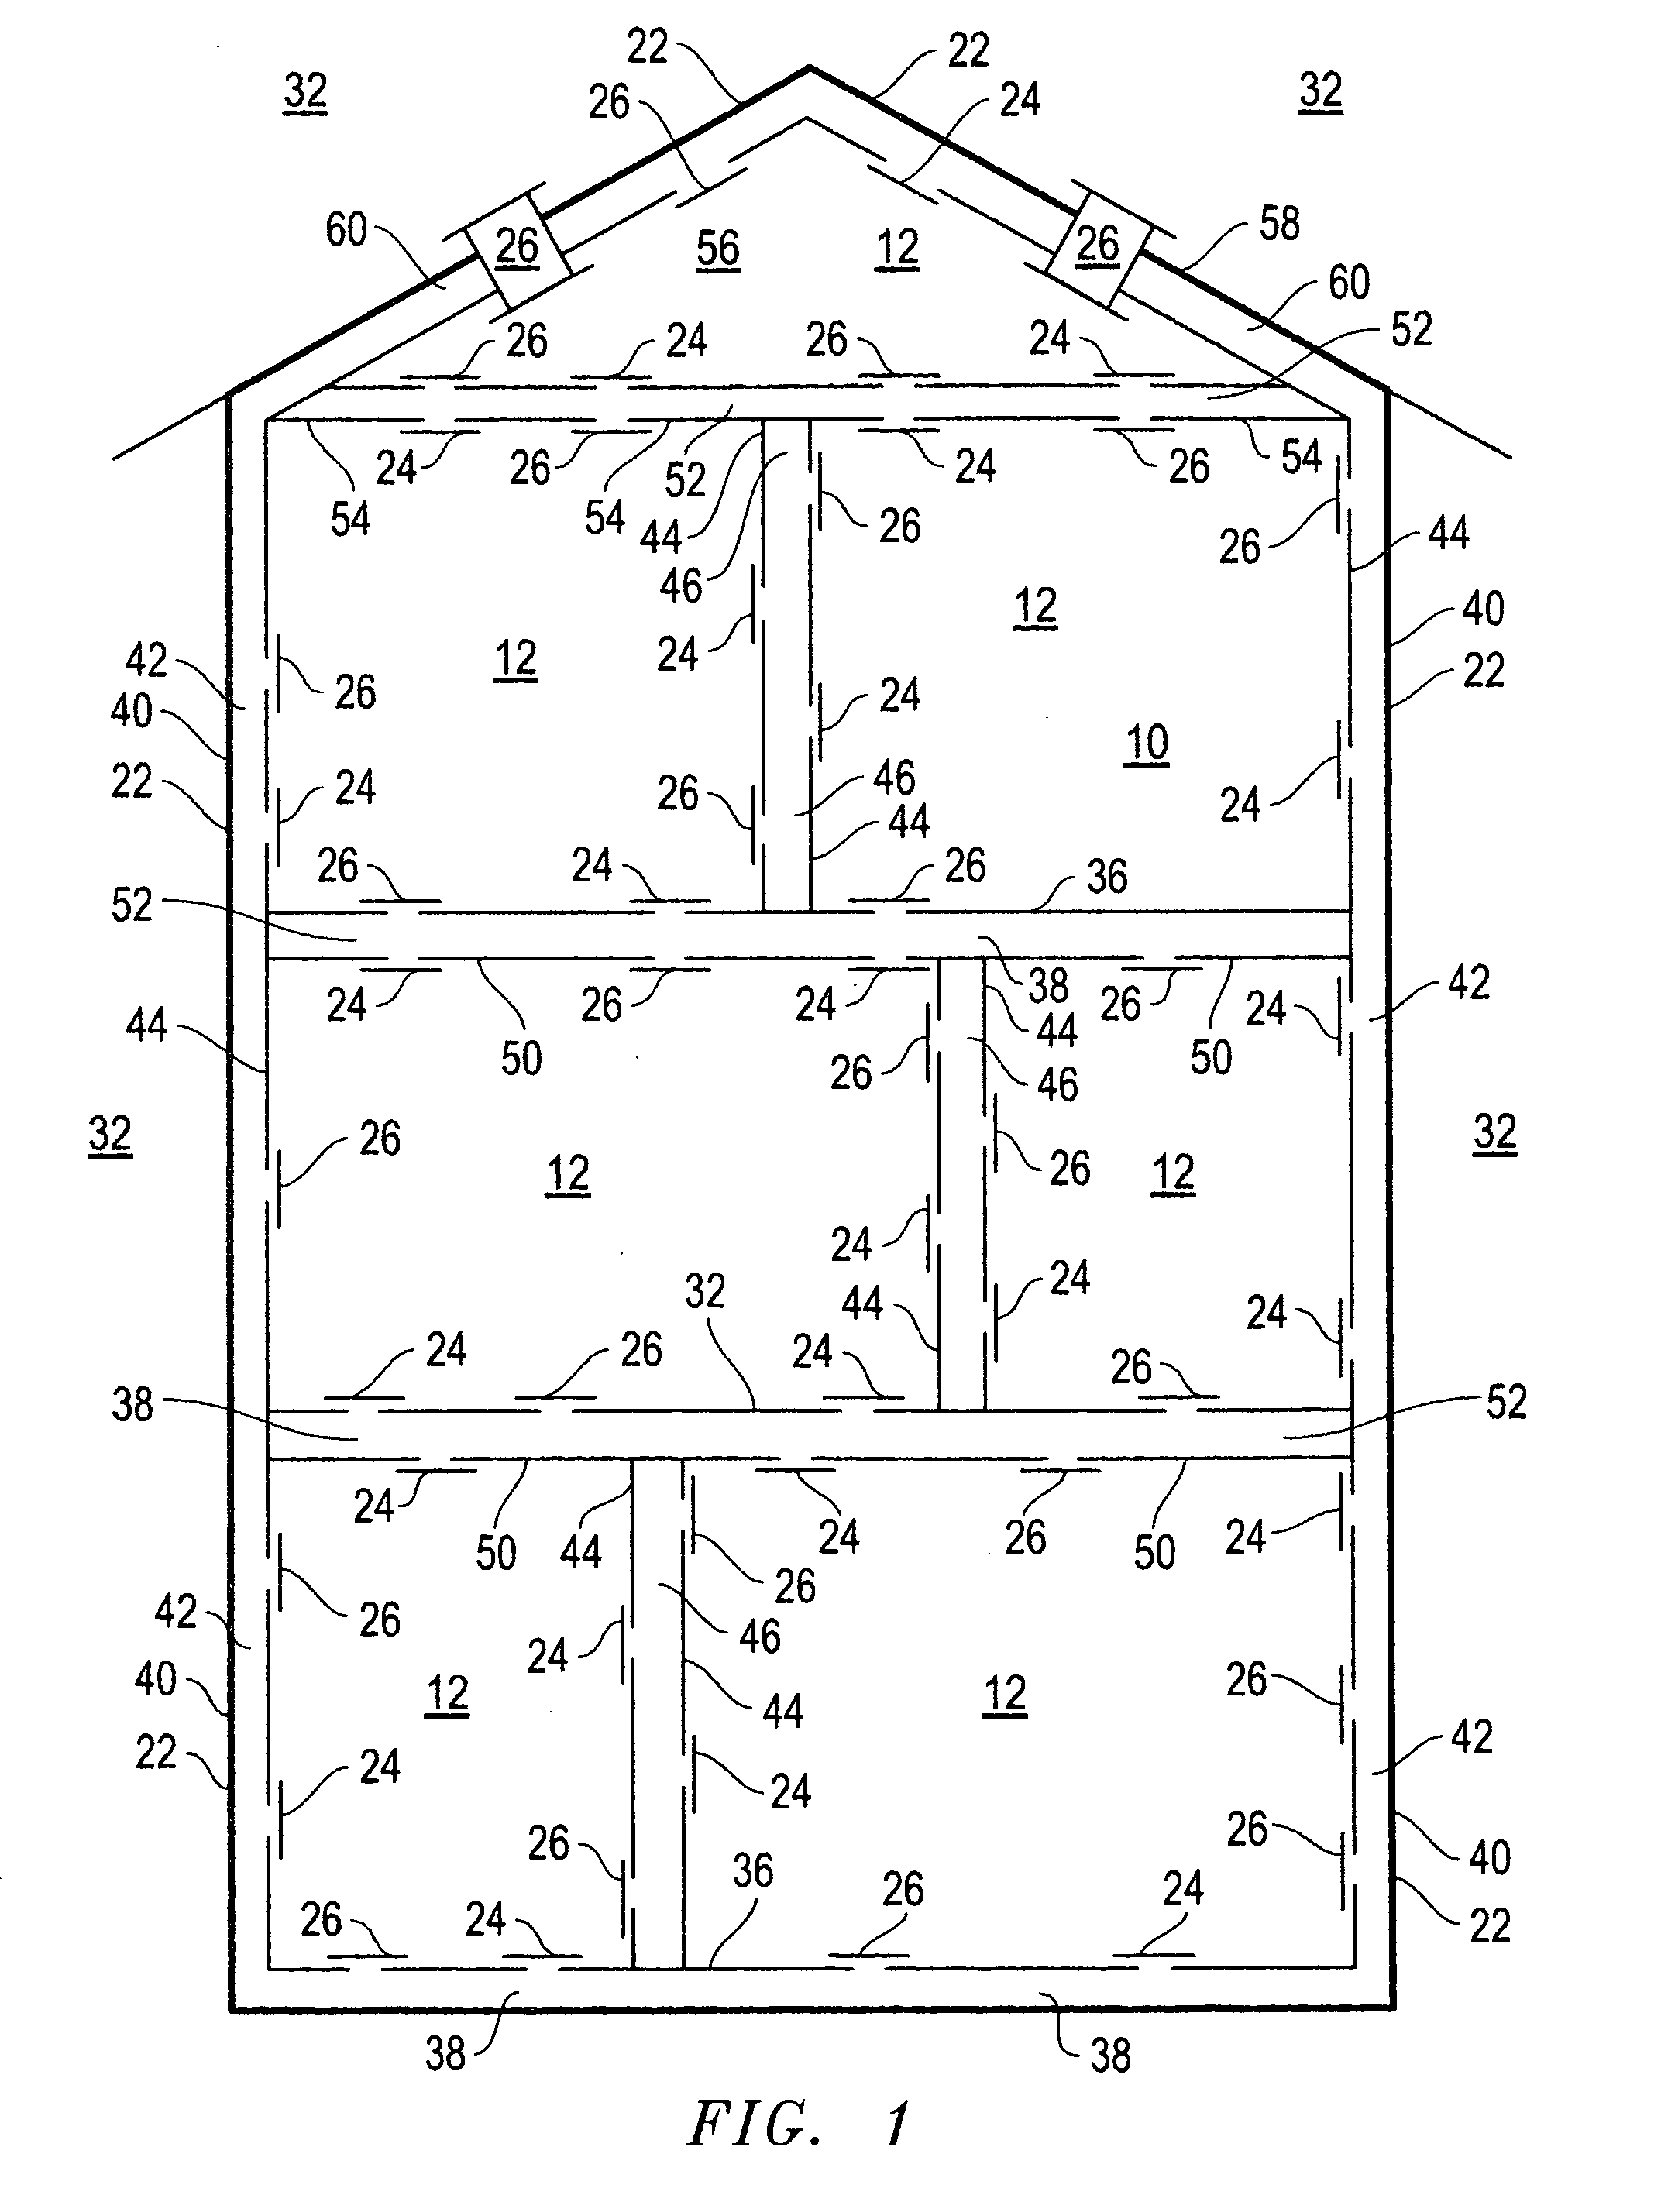 Method and apparatus to utilize wind energy within a structure